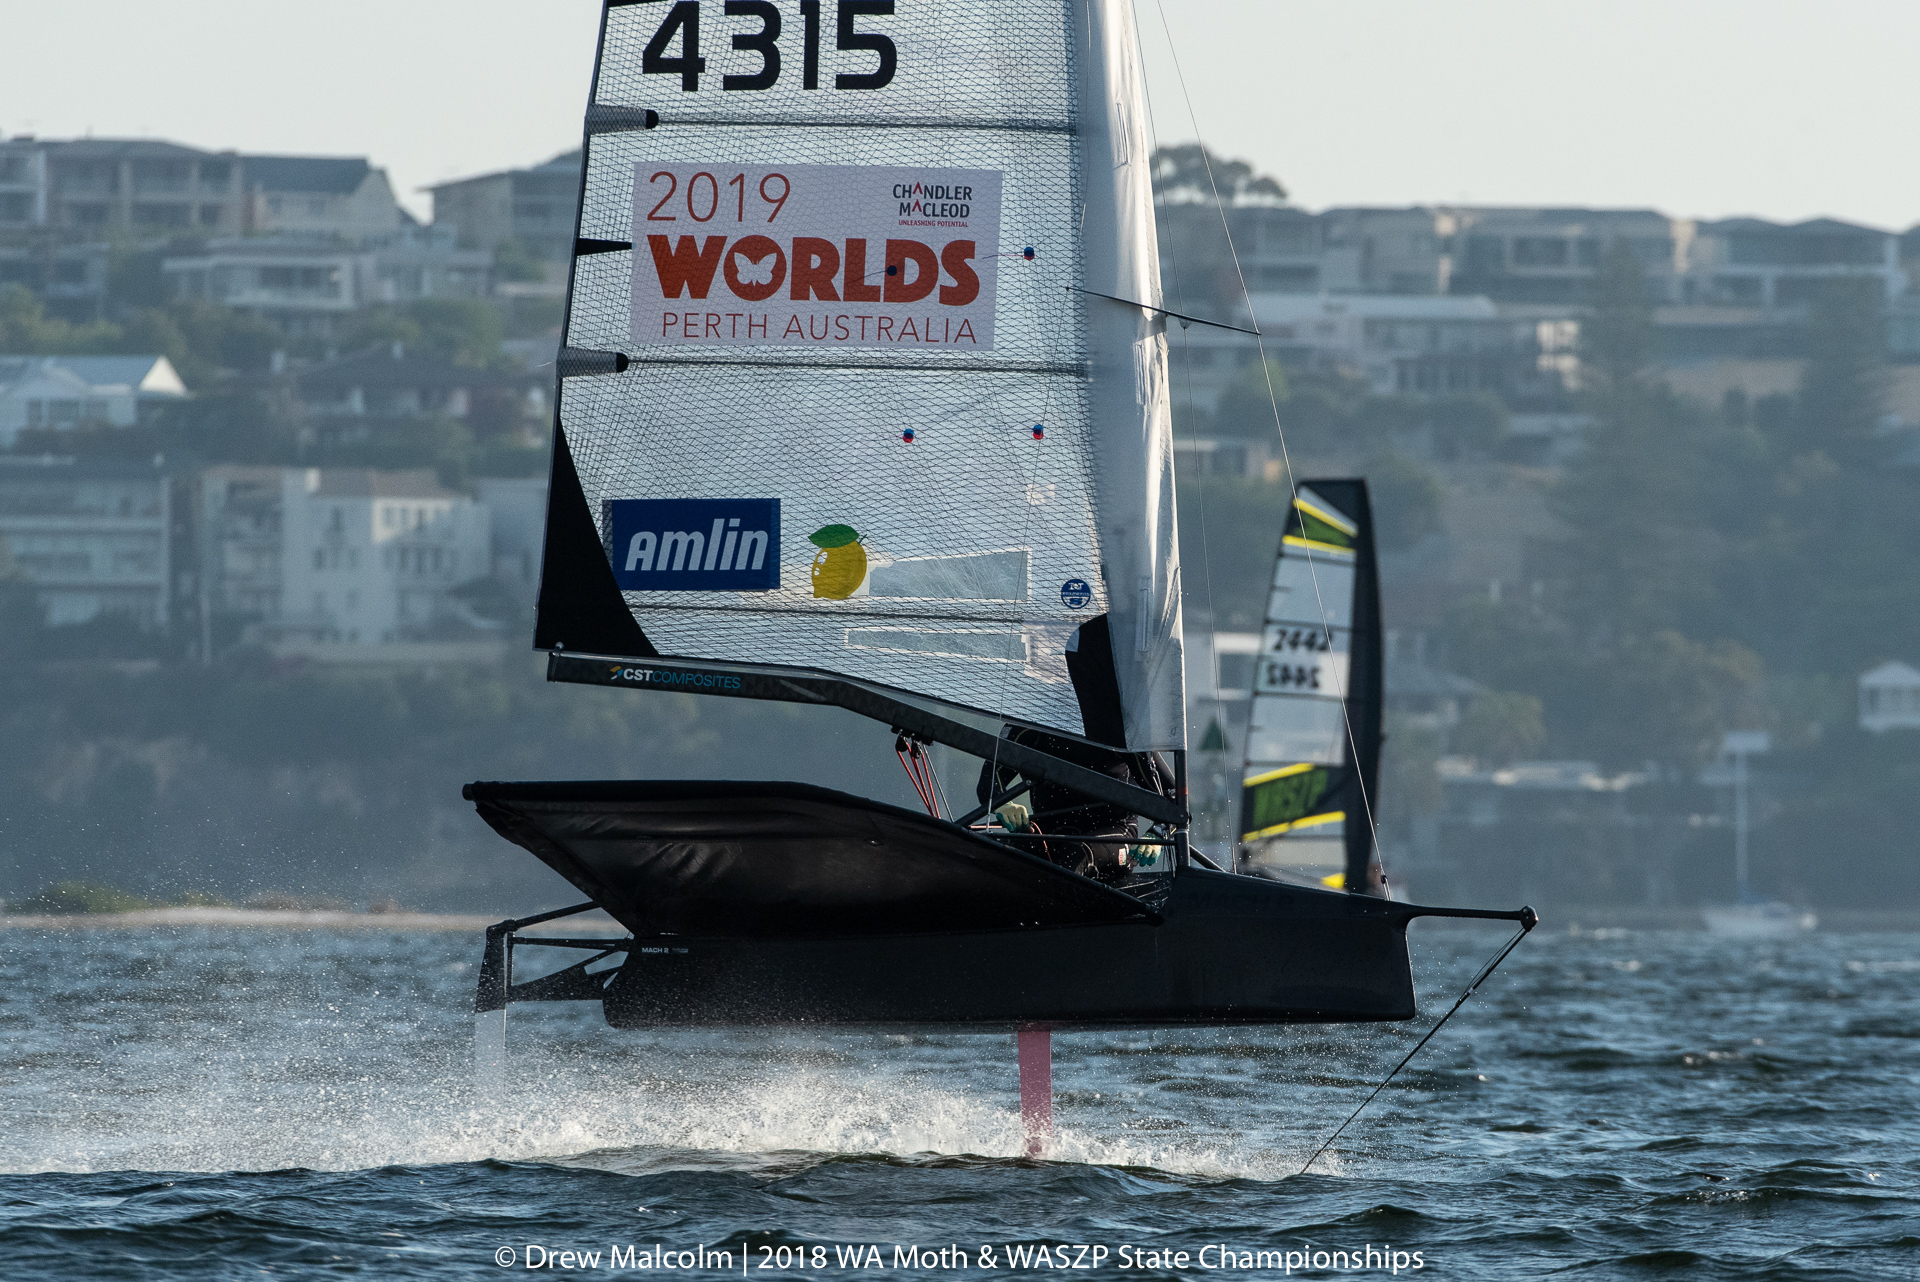 Countdown begins for 2019 Moth Worlds on Perth waters